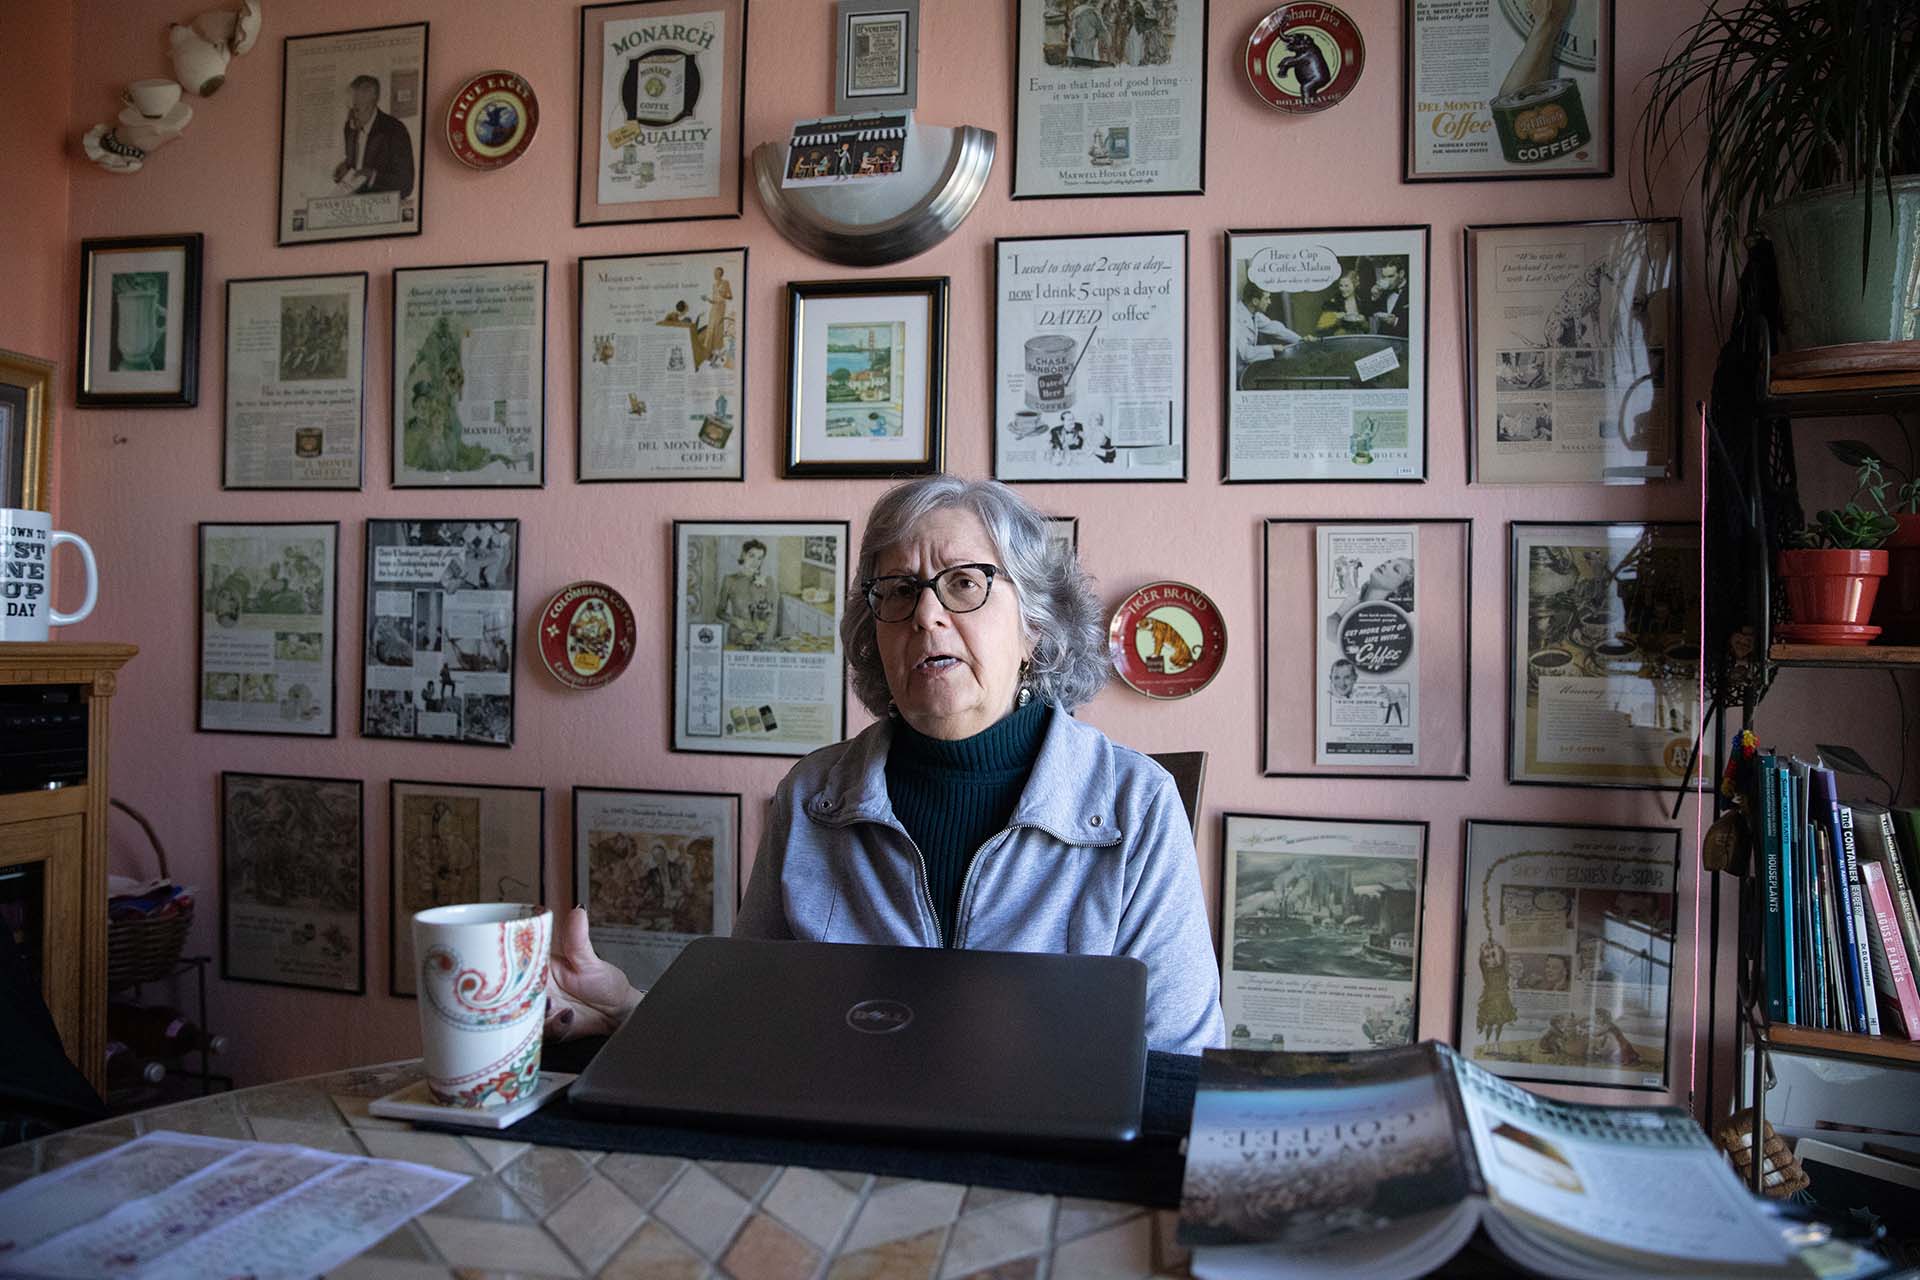 Woman wearing glasses sits in front of a wall covered in old newspaper clippings and coffee advertisements.